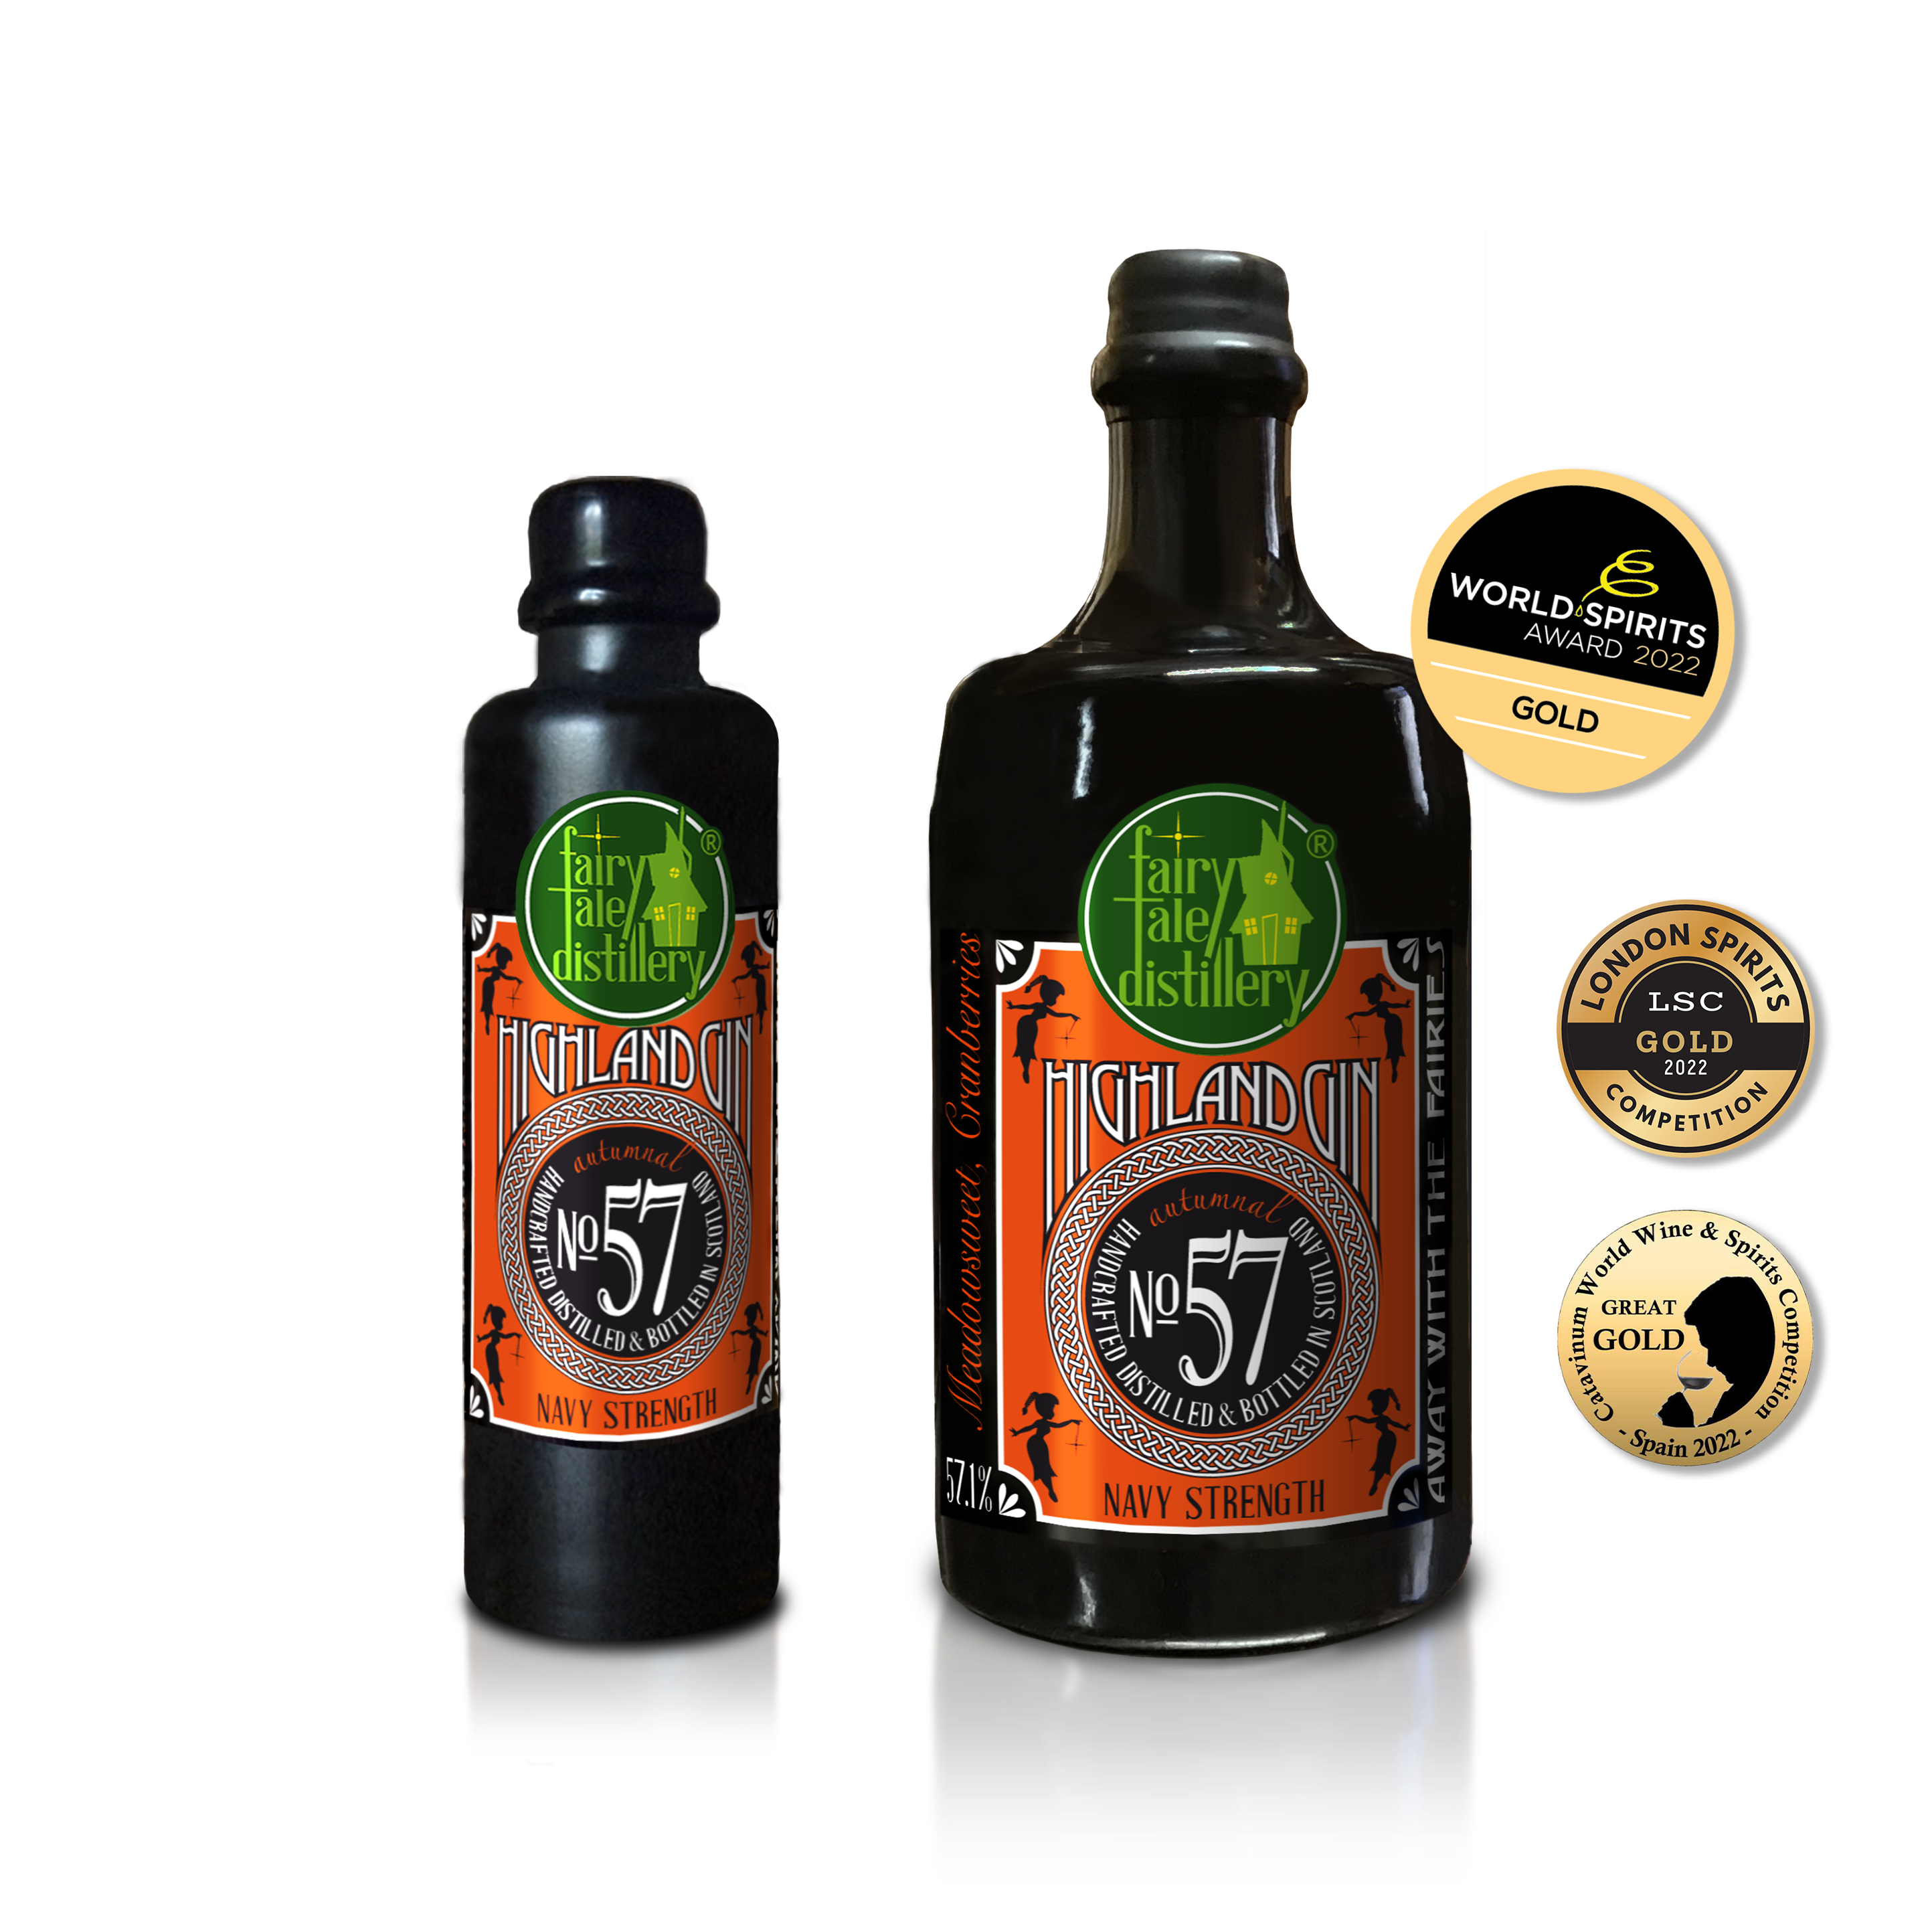 No 57 Navy Strength Autumnal Gin bottle from Fairytale Distillery with World Spirits Award 2022 Gold - London Spirits Competition 2022 Gold - Catavinum World Wine & Spirits Competition Spain 2022 Great Gold